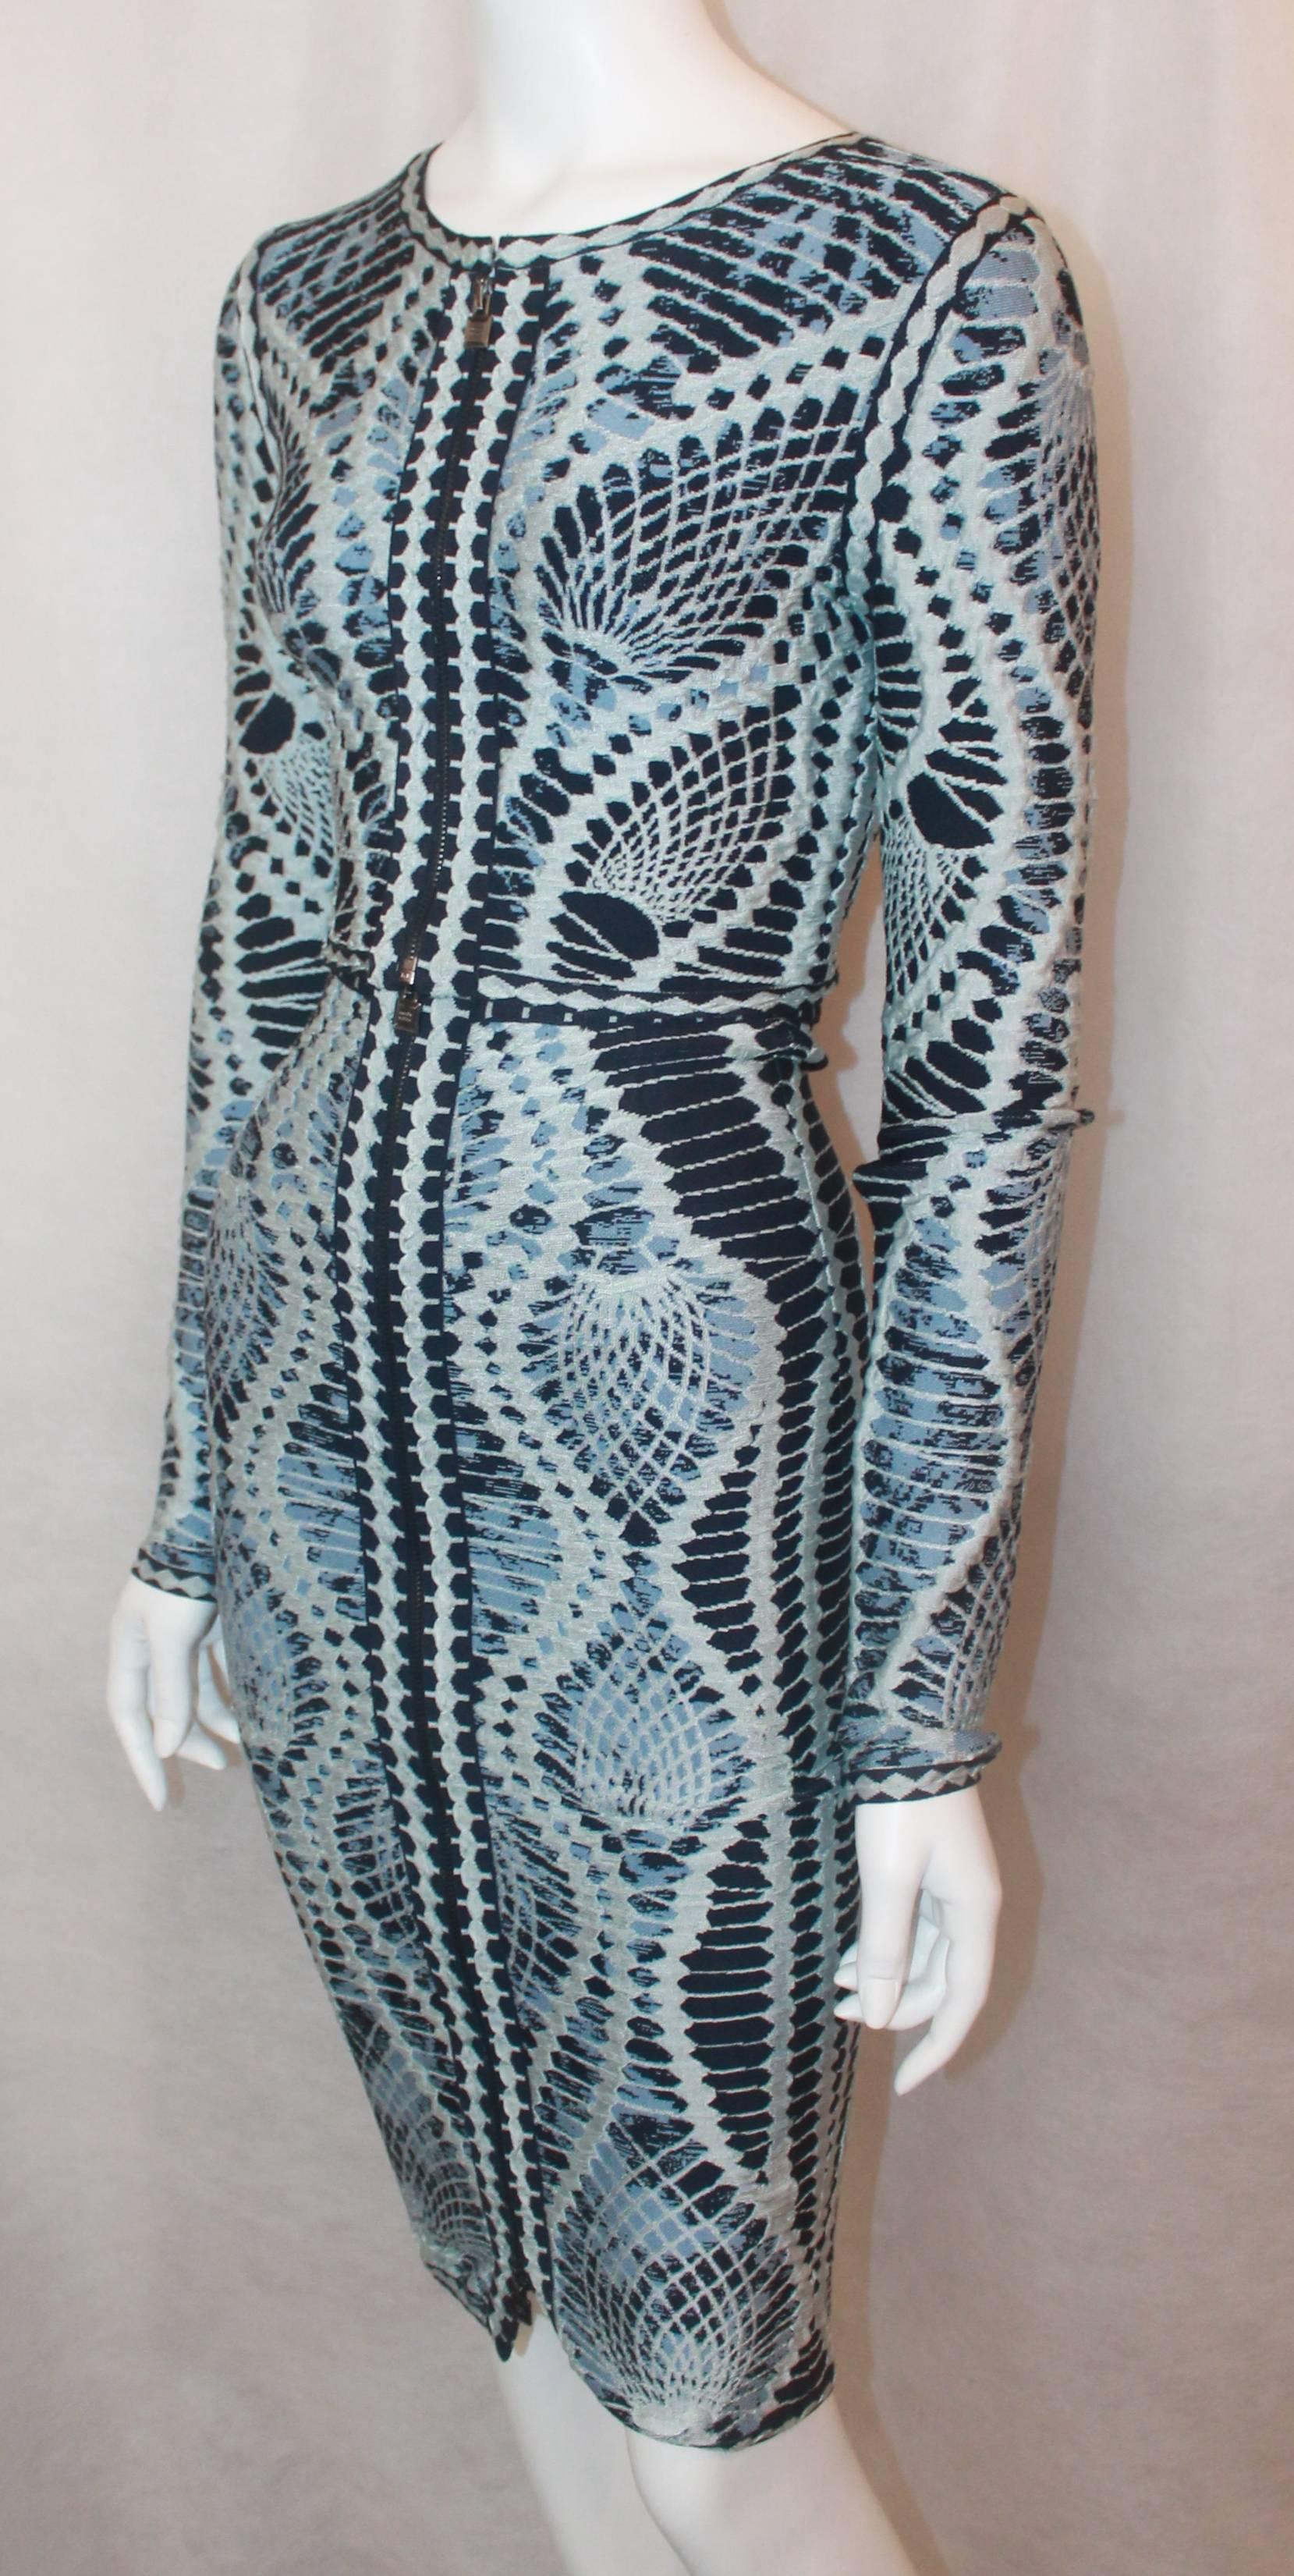 Herve Leger Navy & Blue Printed Crop Bolero and Midi Skirt Set - XS. This tight set is in excellent condition and looks fantastic on. It features palladium zippers on both the bolero and skirt and also on the sleeve ends.